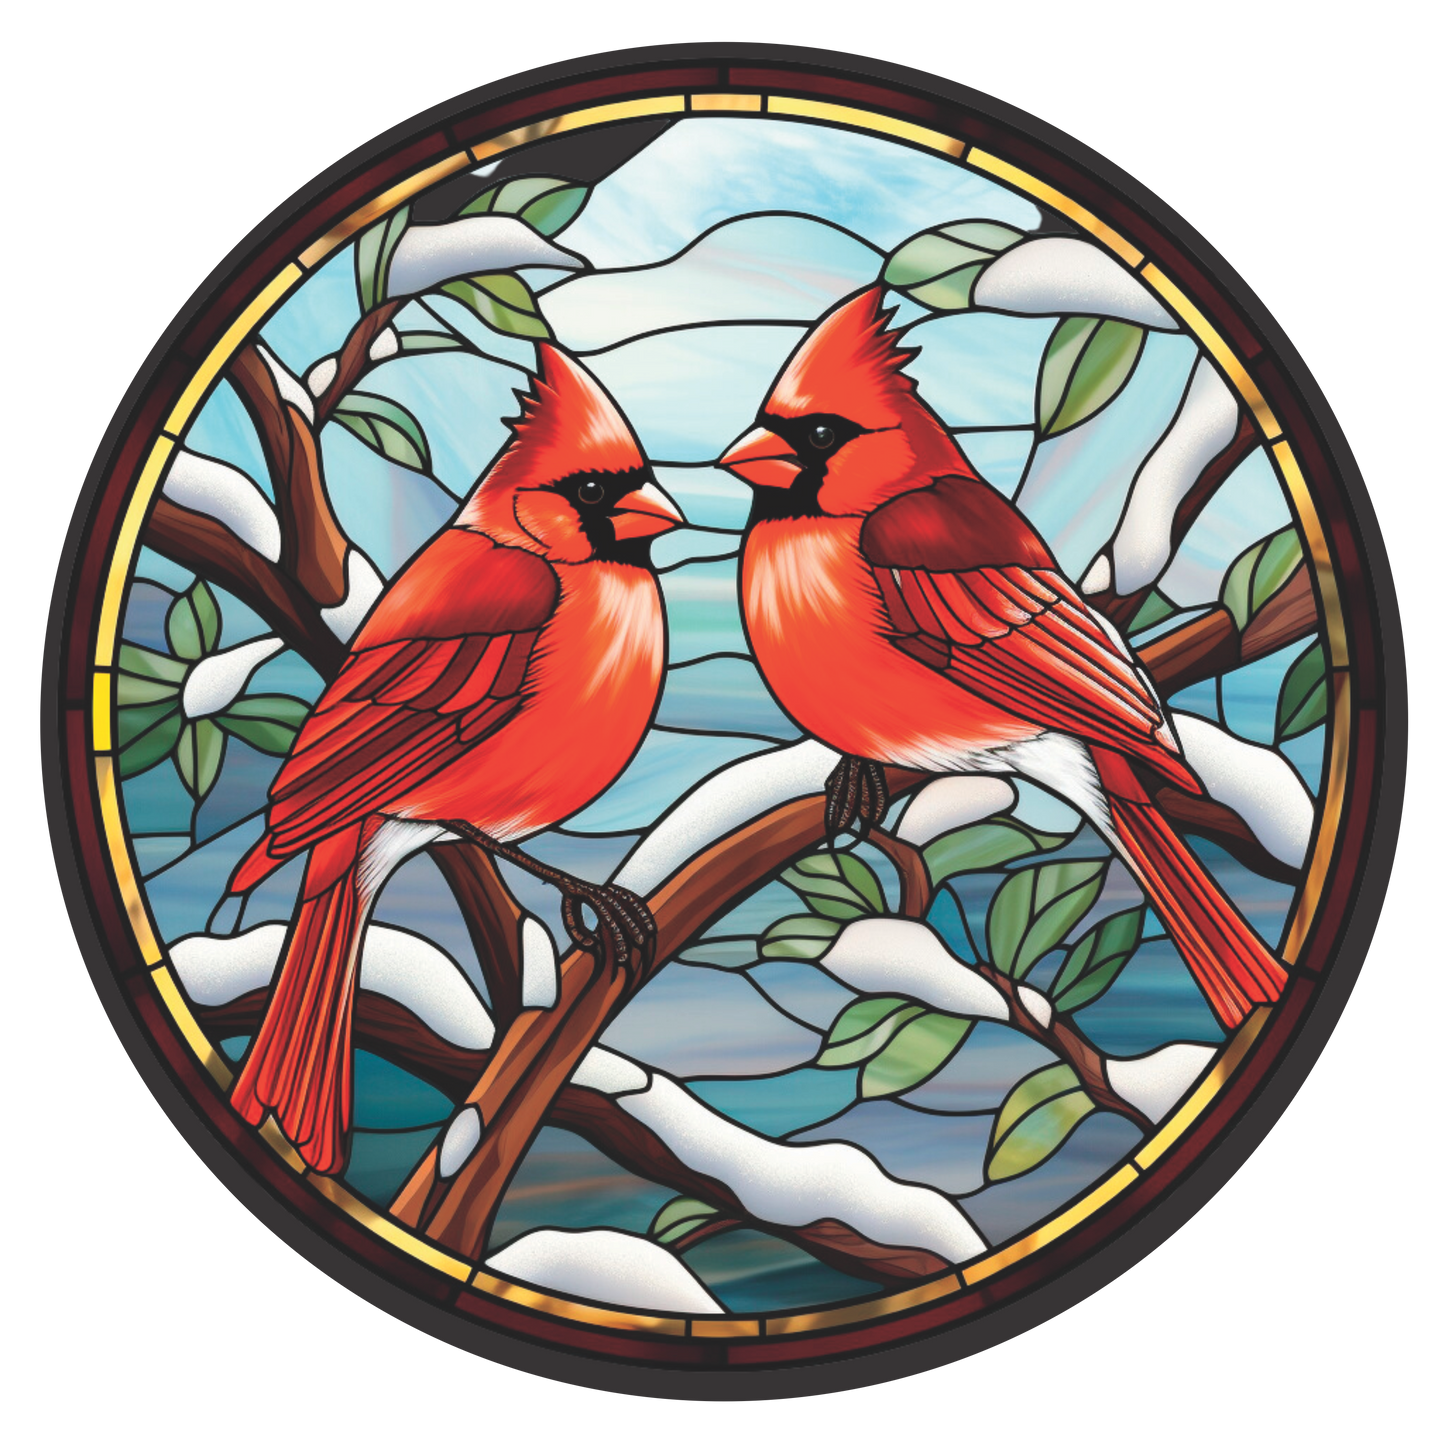 Cardinals on a Snowy Branch in Stained Glass Round